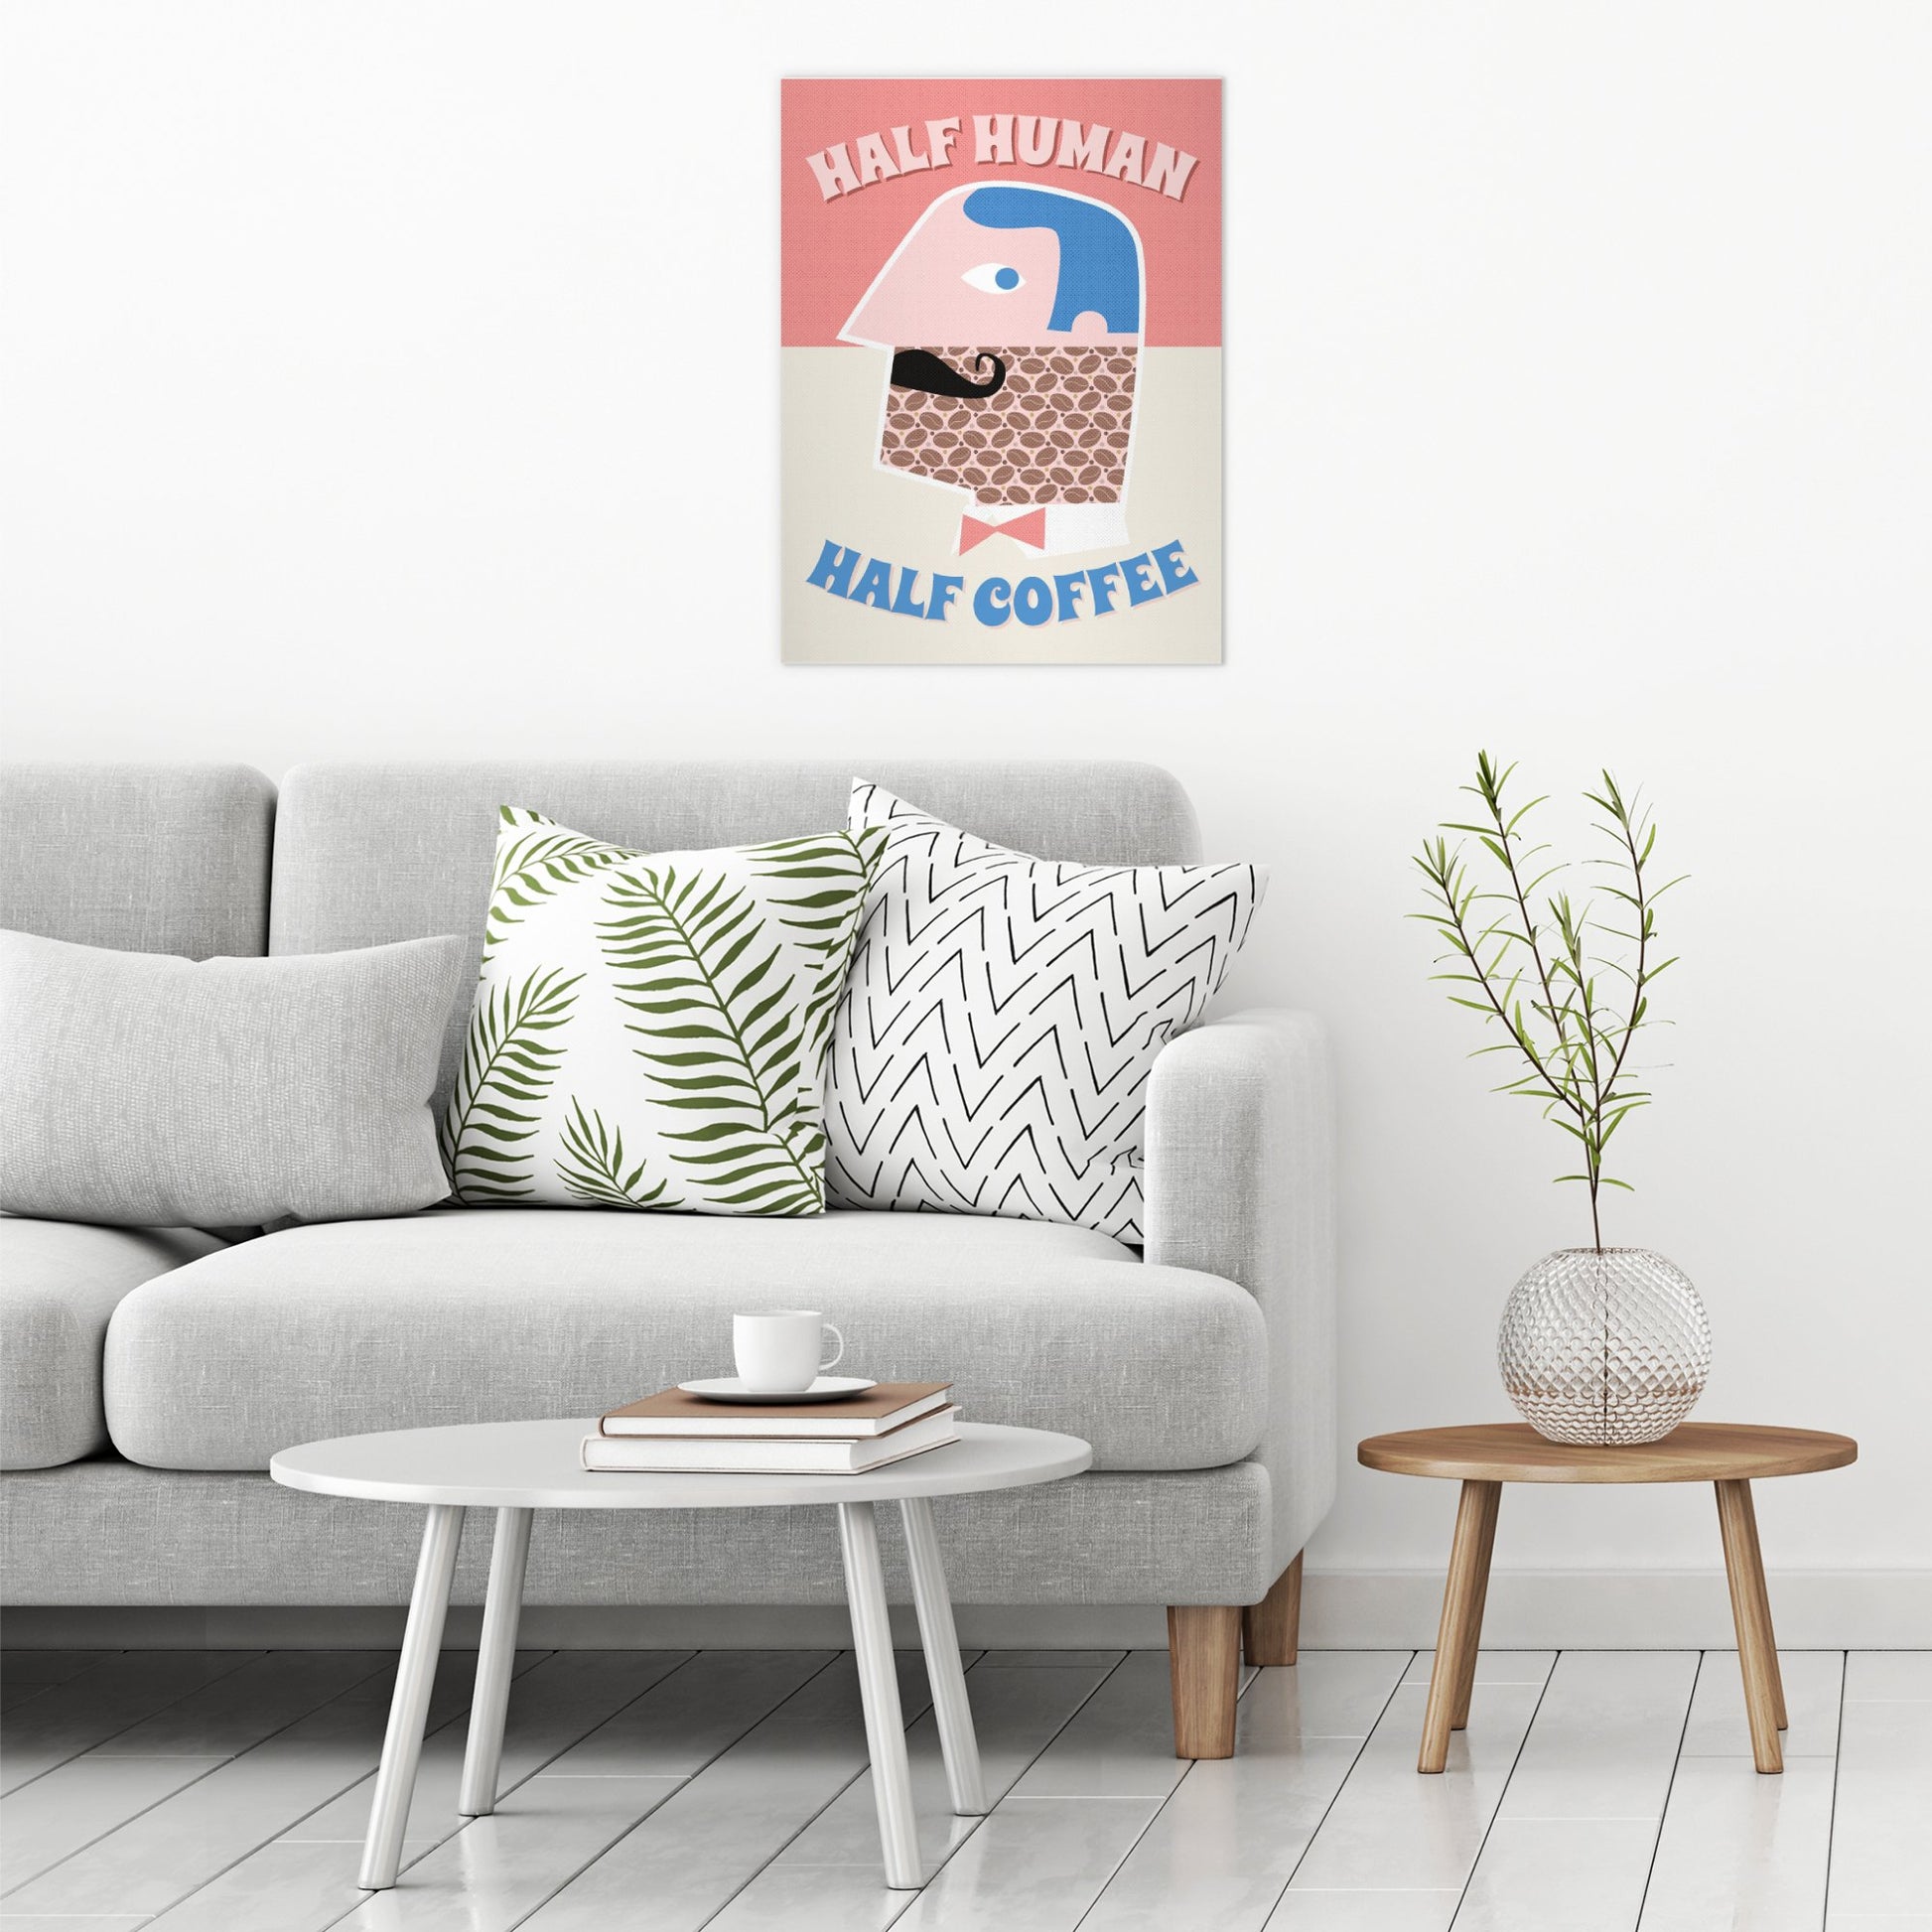 A contemporary modern room view showing a large size metal art poster display plate with printed design of a Half Human Half Coffee' Fun Retro Quote